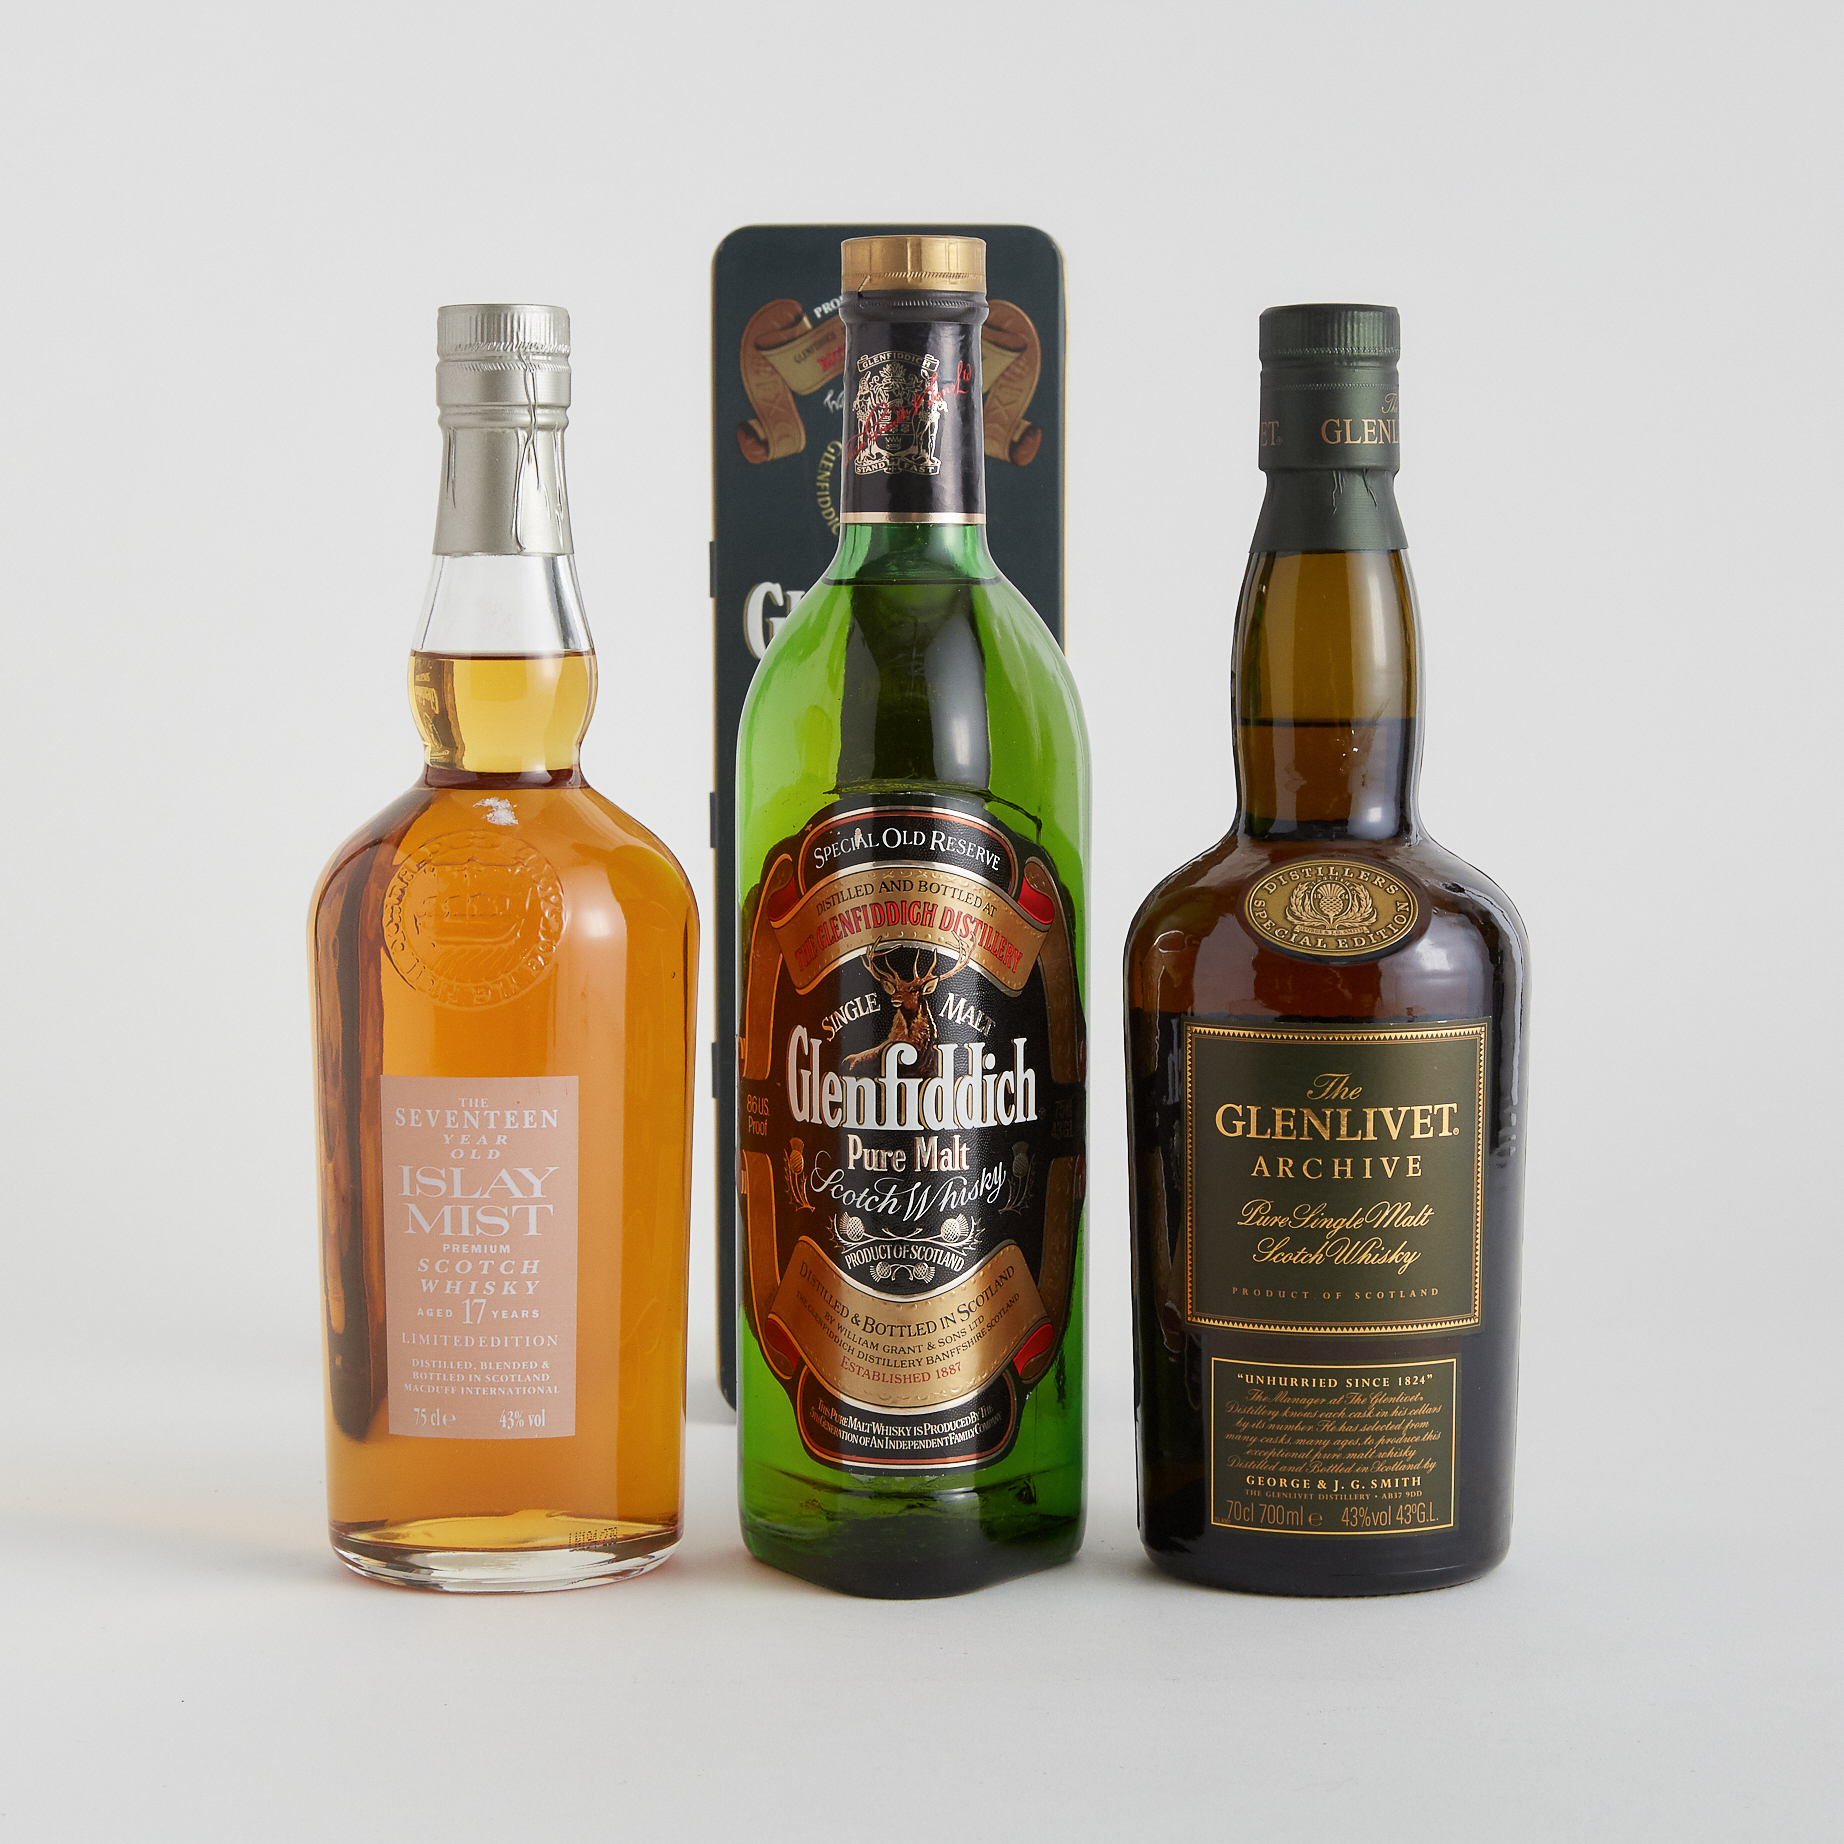 GLENFIDDICH PURE MALT SCOTCH WHISKY NAS (ONE 750 ML)
ISLAY MIST PREMIUM BLENDED SCOTCH WHISKY 17 YEARS (ONE 75 CL)
THE GLENLIVET ARCHIVE PURE SINGLE MALT SCOTCH WHISKY NAS (ONE 70 CL)